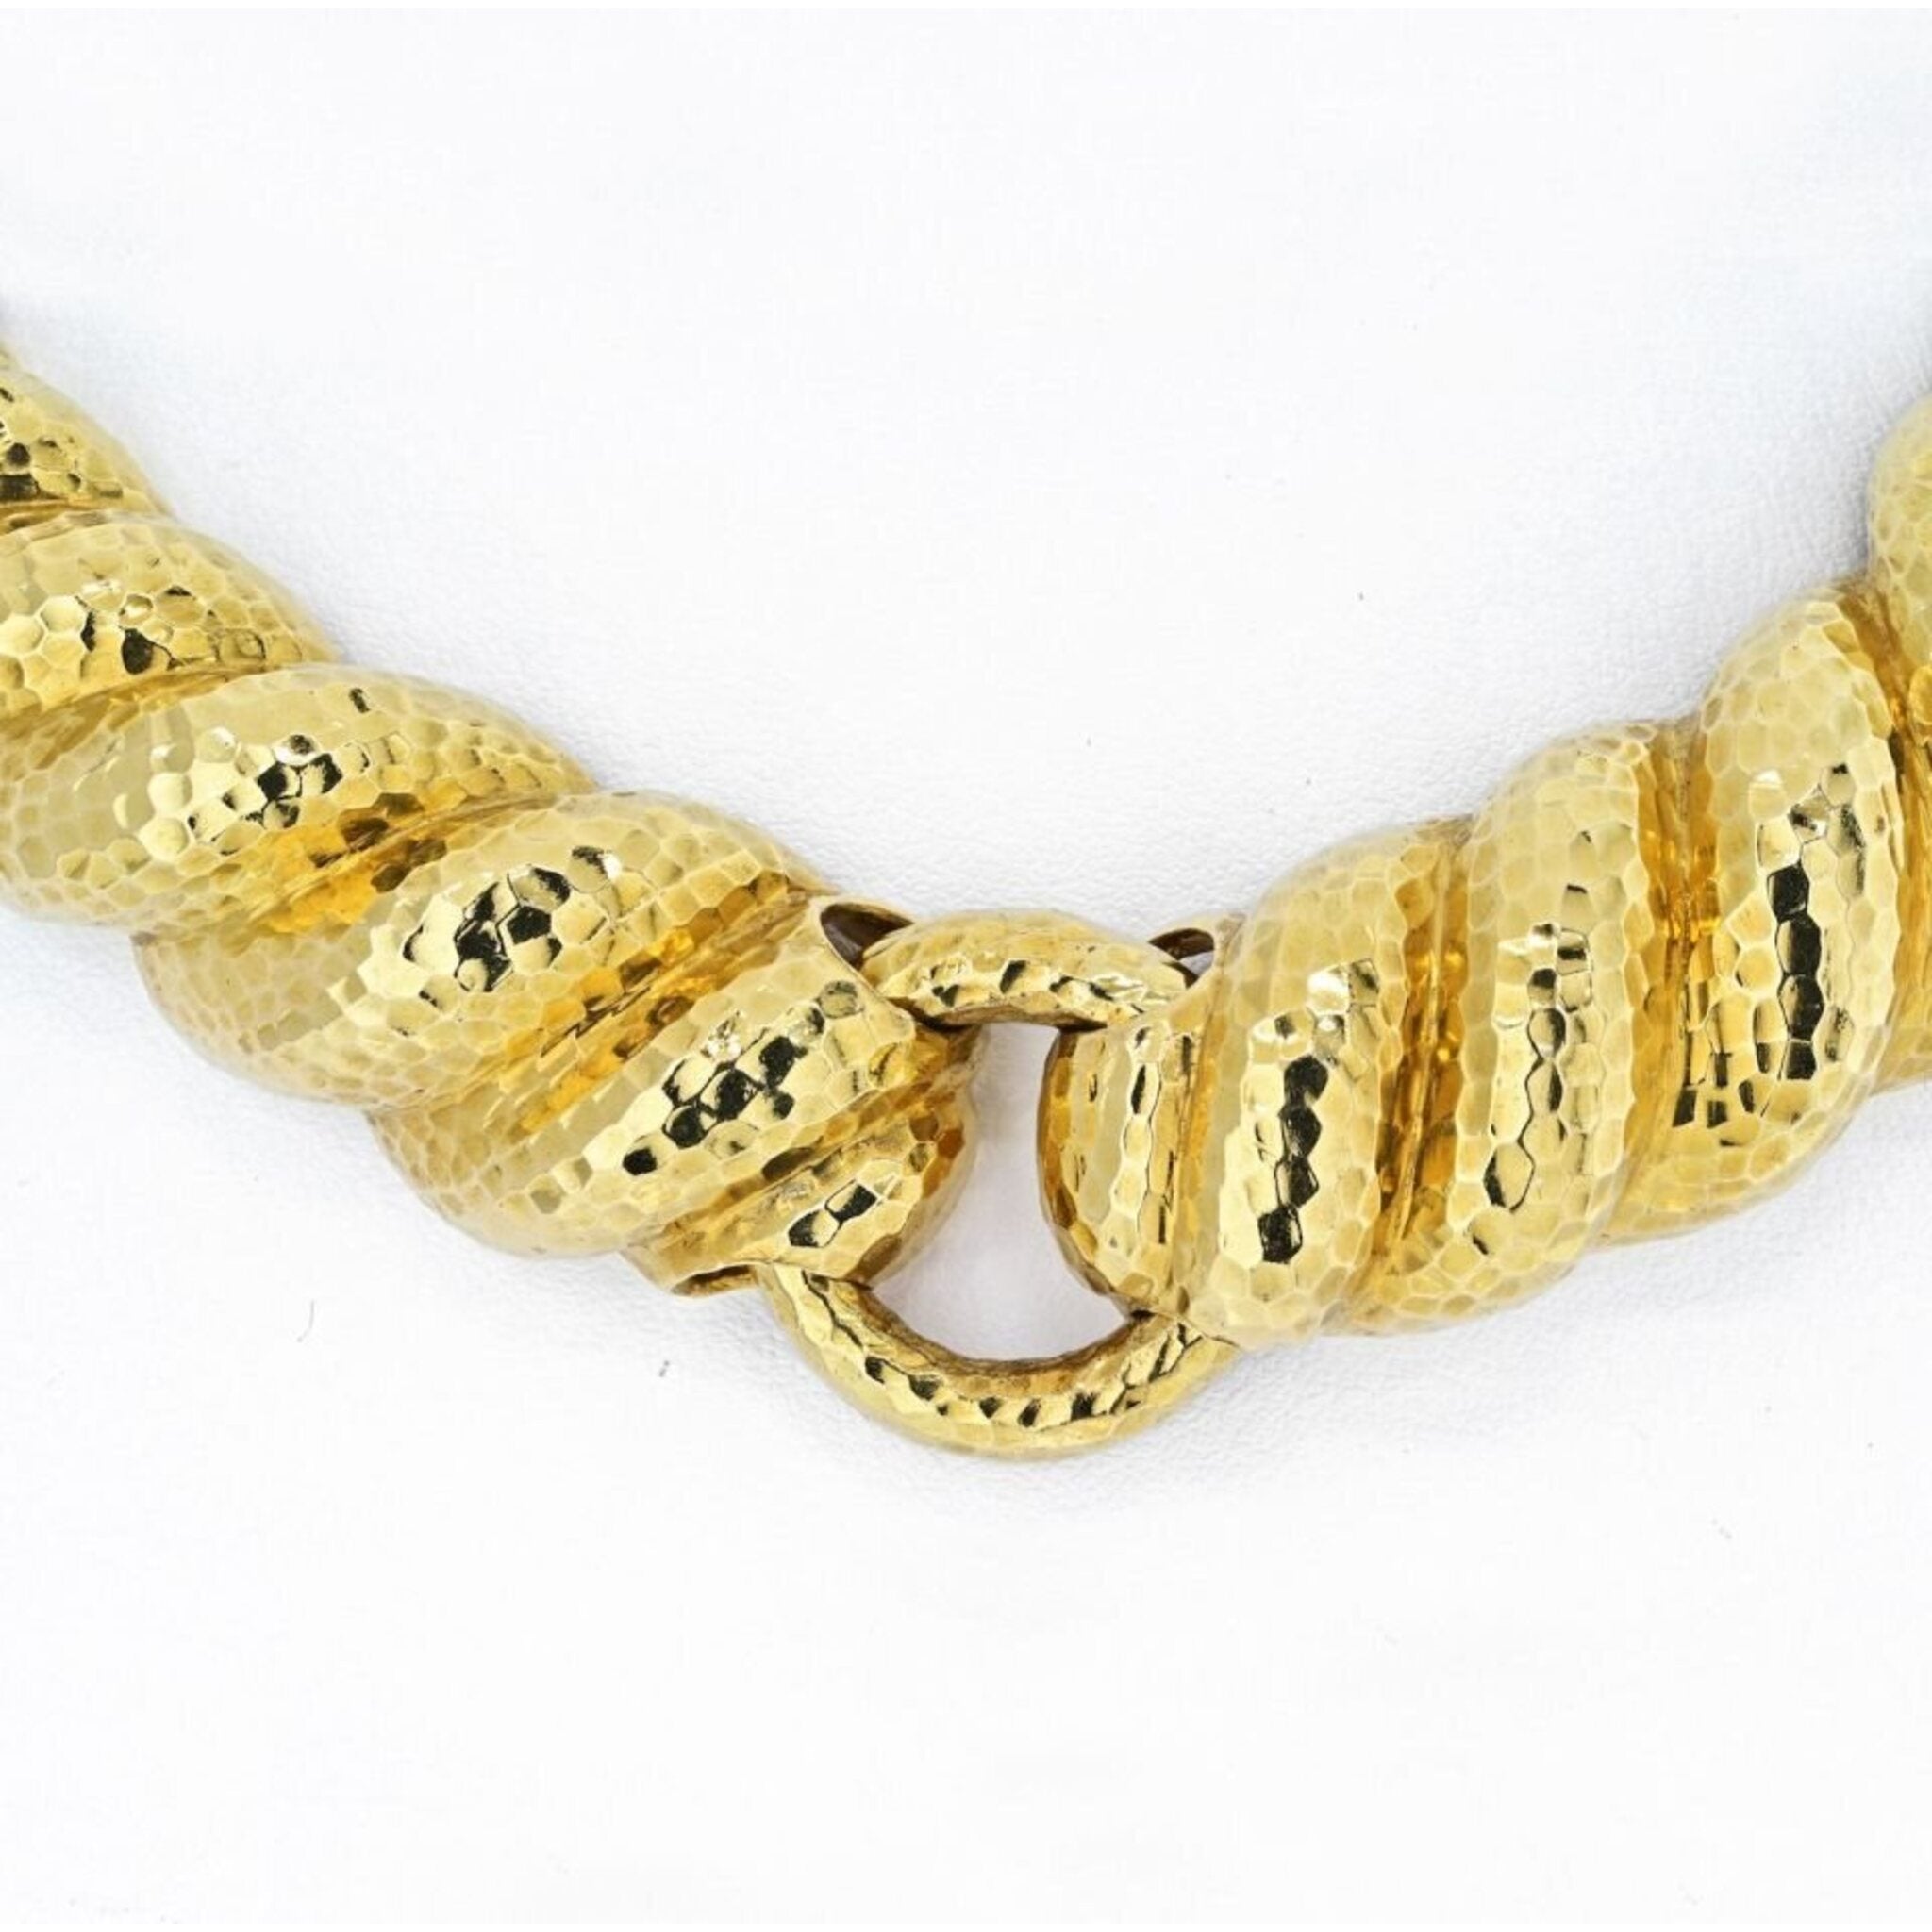 David Webb - Hammered F 18K Yellow Gold Necklace